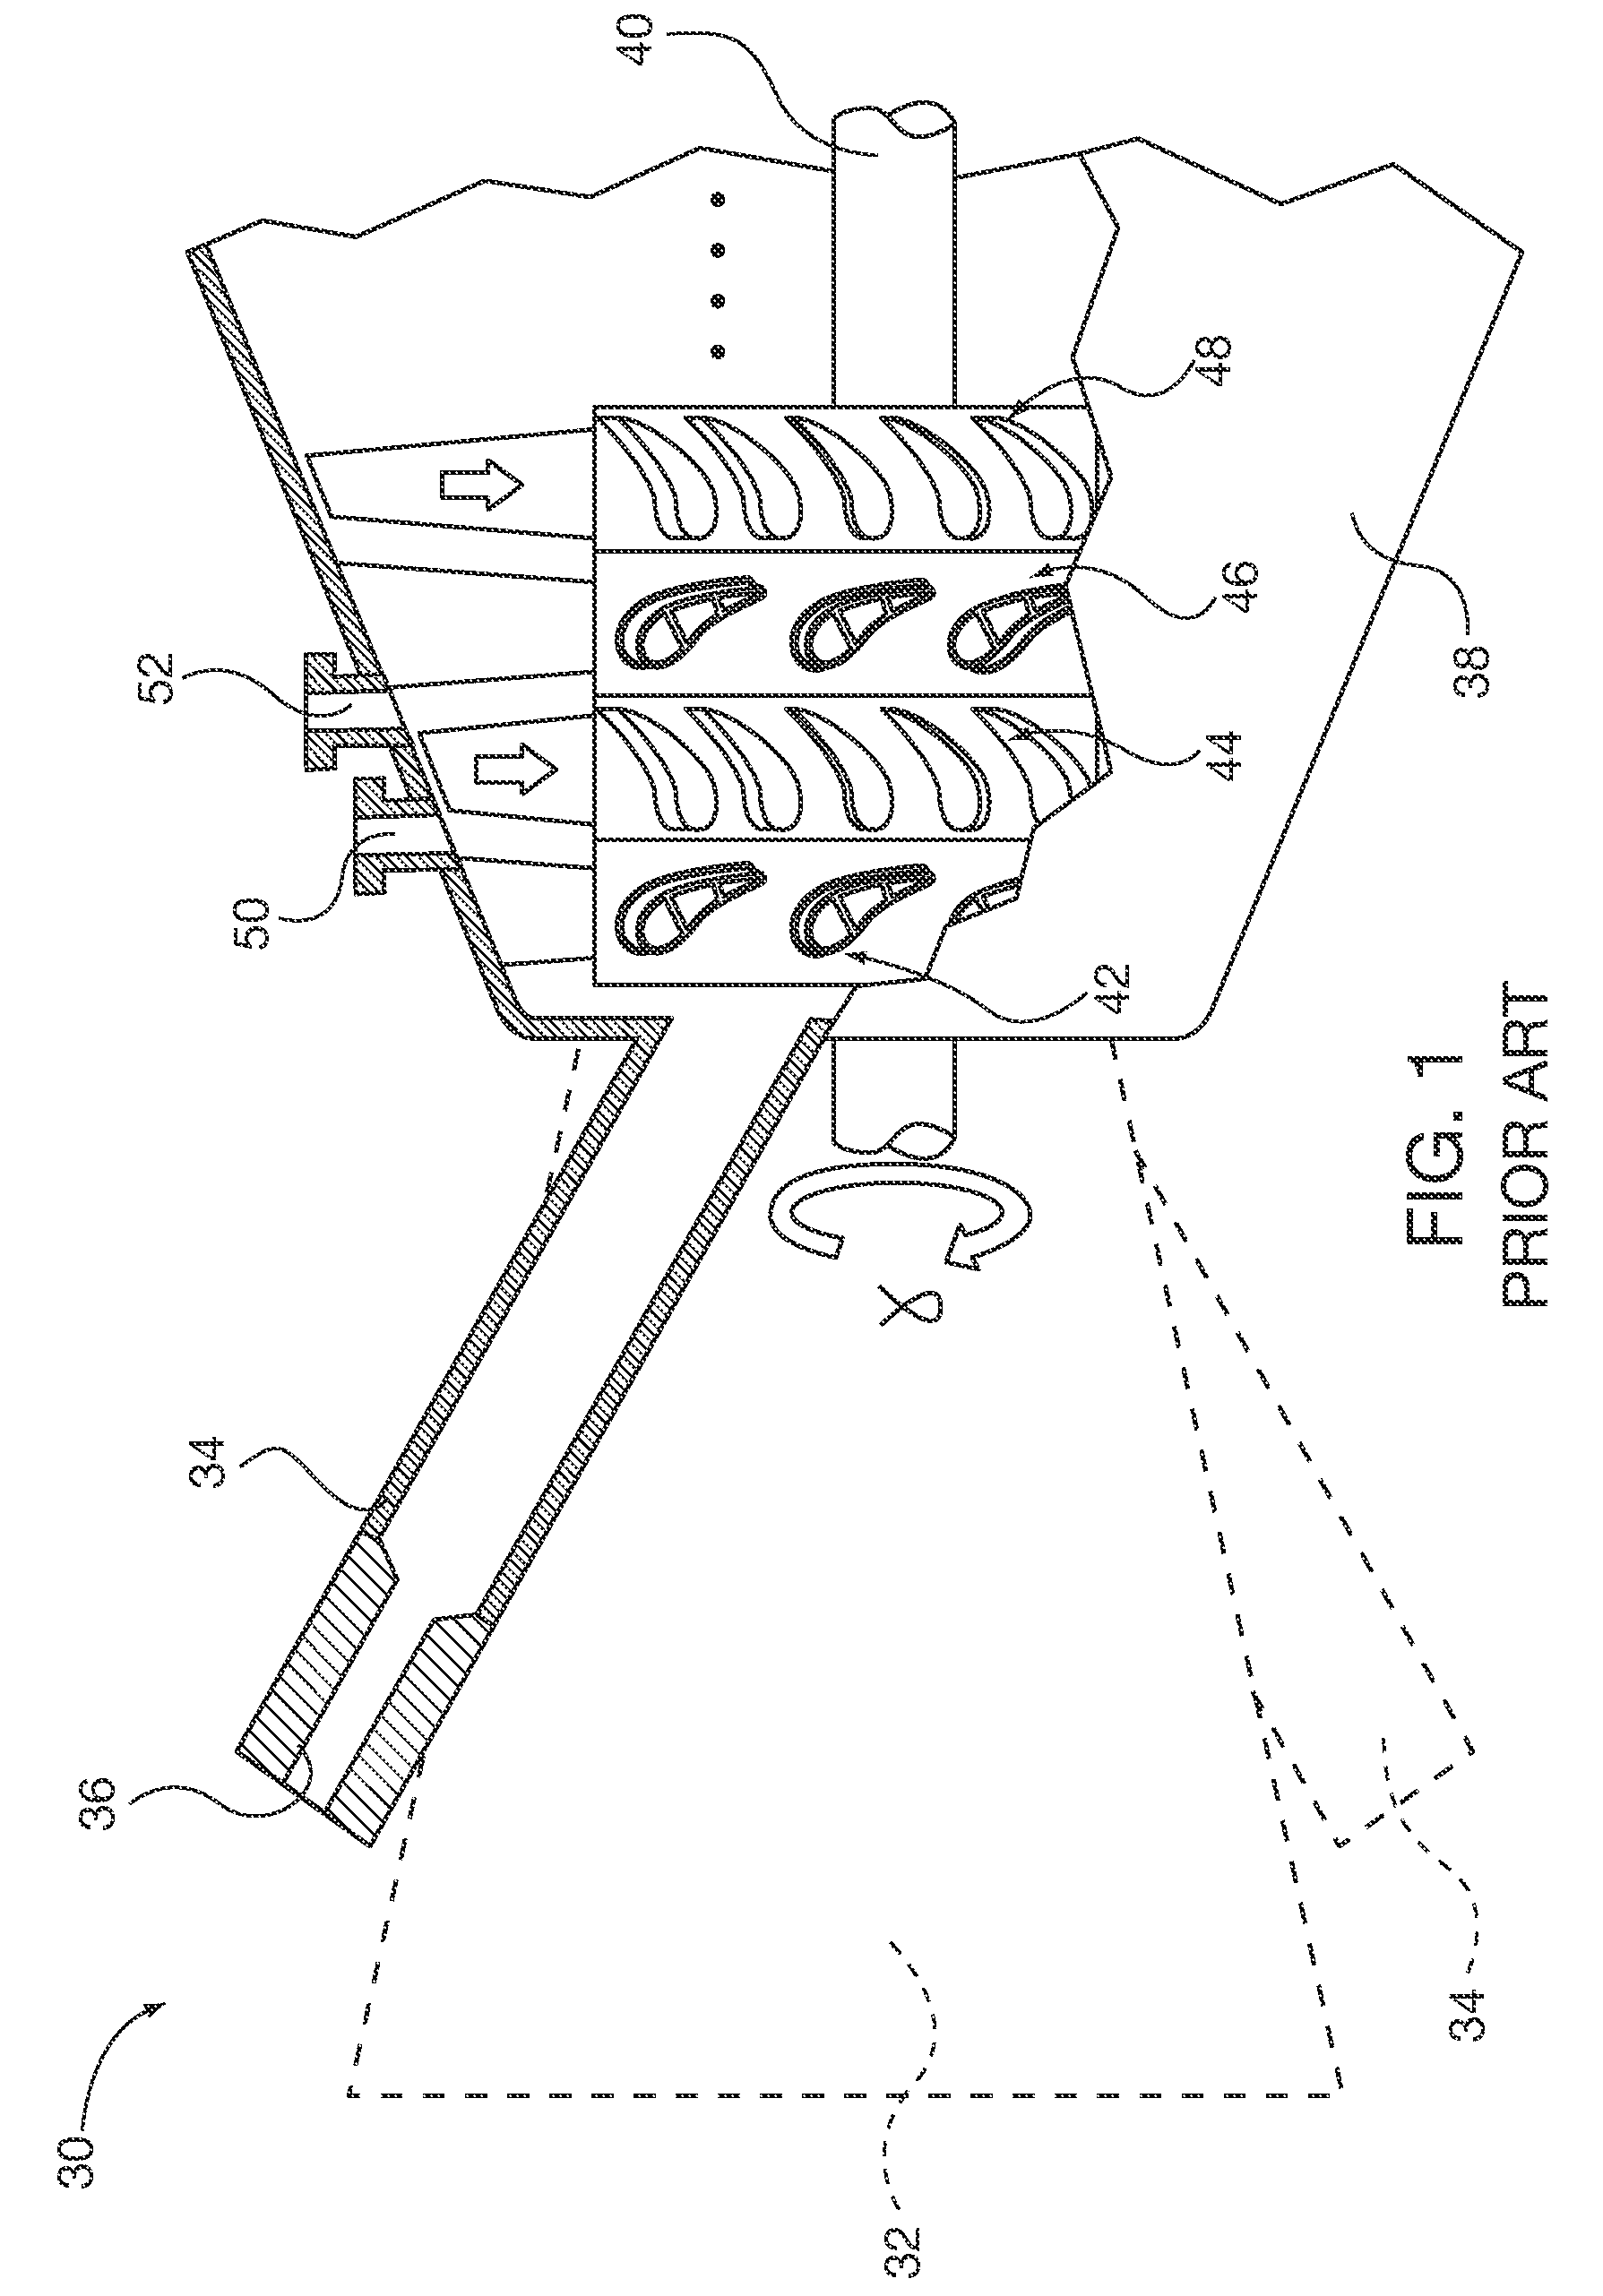 System and method for automated optical inspection of industrial gas turbines and other power generation machinery with multi-axis inspection scope